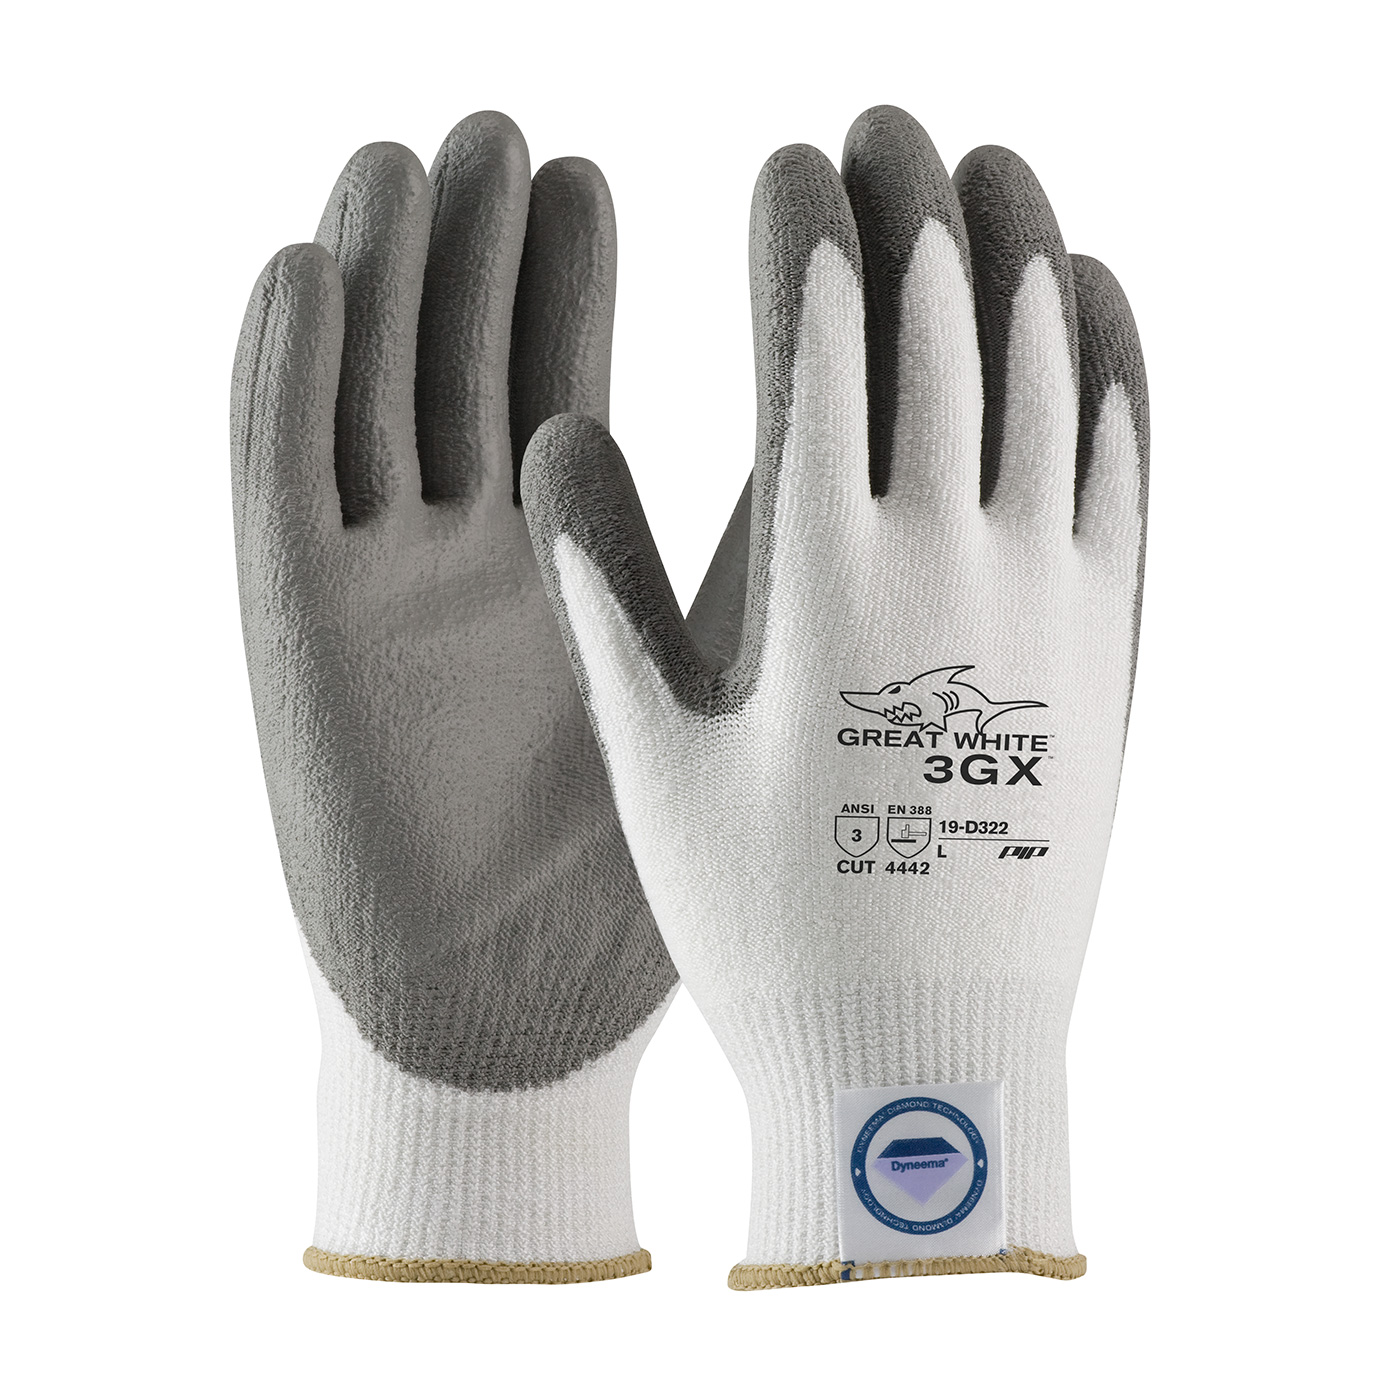 PIP 19-D322/S Great White 3GX Seamless Knit Dyneema Diamond Blended Glove with Polyurethane Coated Smooth Grip on Palm & Fingers - Small PID-19 D322 SM